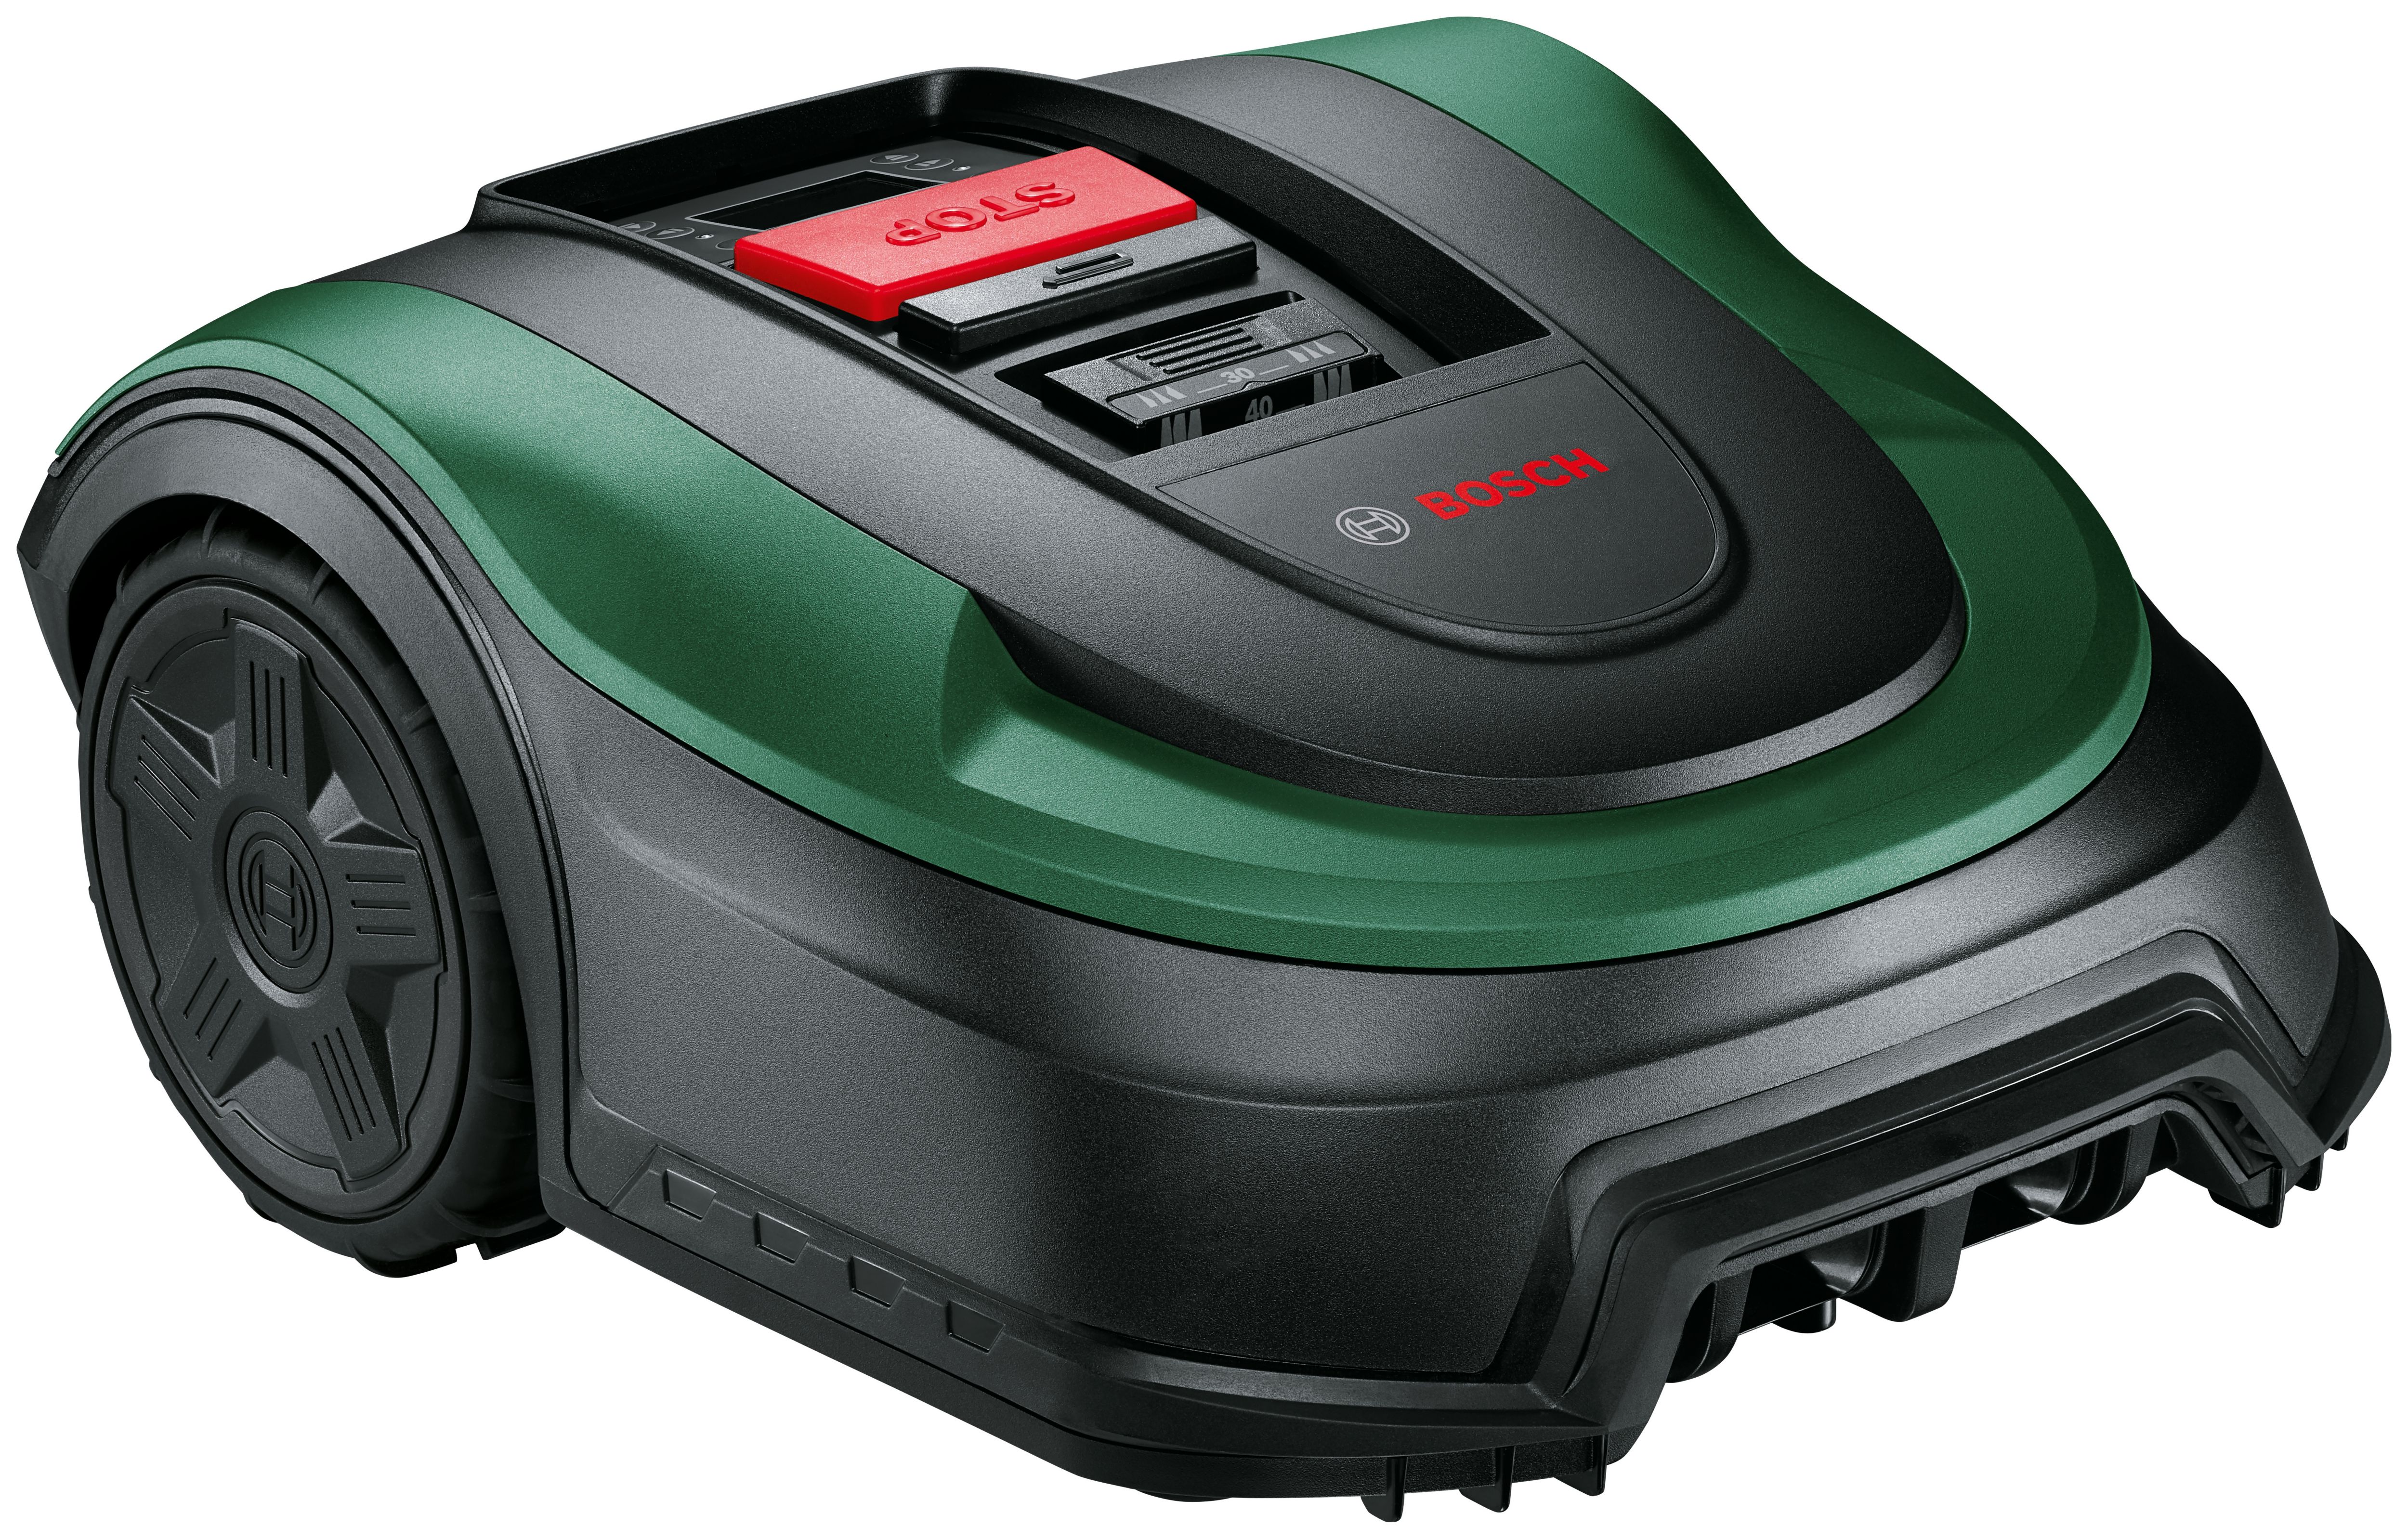 Image of Bosch 0.600.8B0.073 Indego XS 300 Robotic Lawn Mower